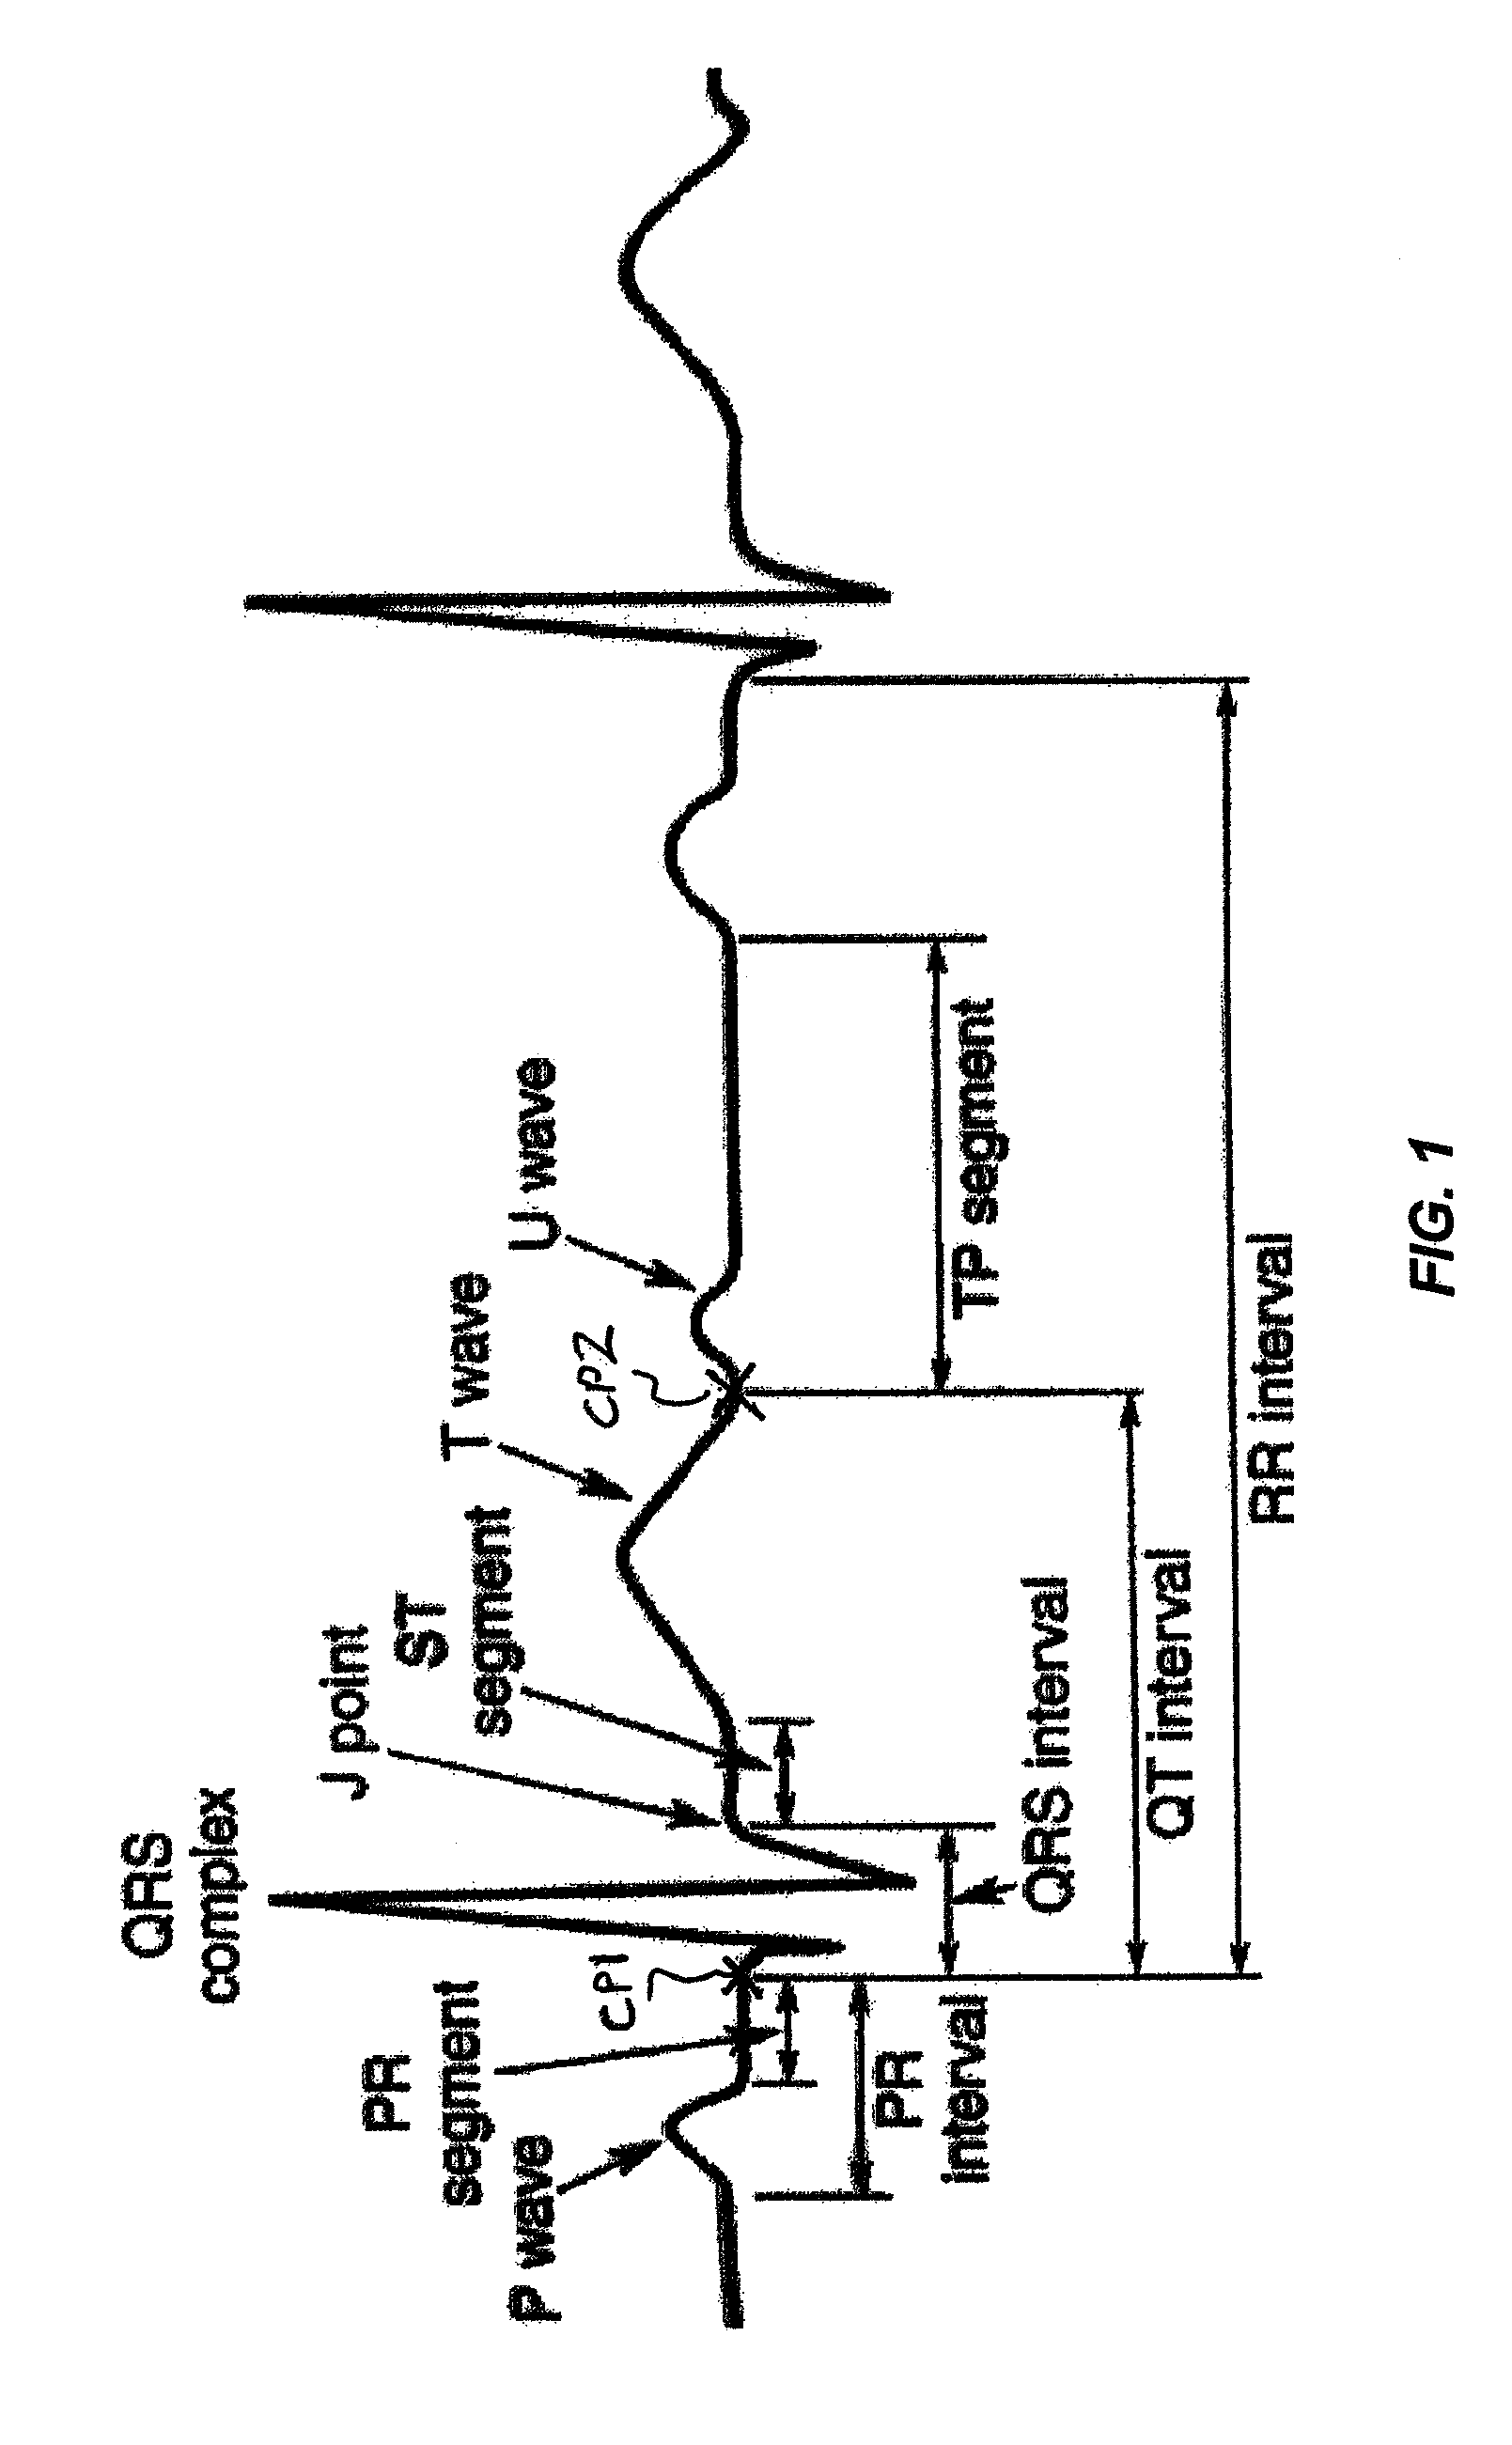 Method and apparatus for rapid interpretive analysis of electrocardiographic waveforms